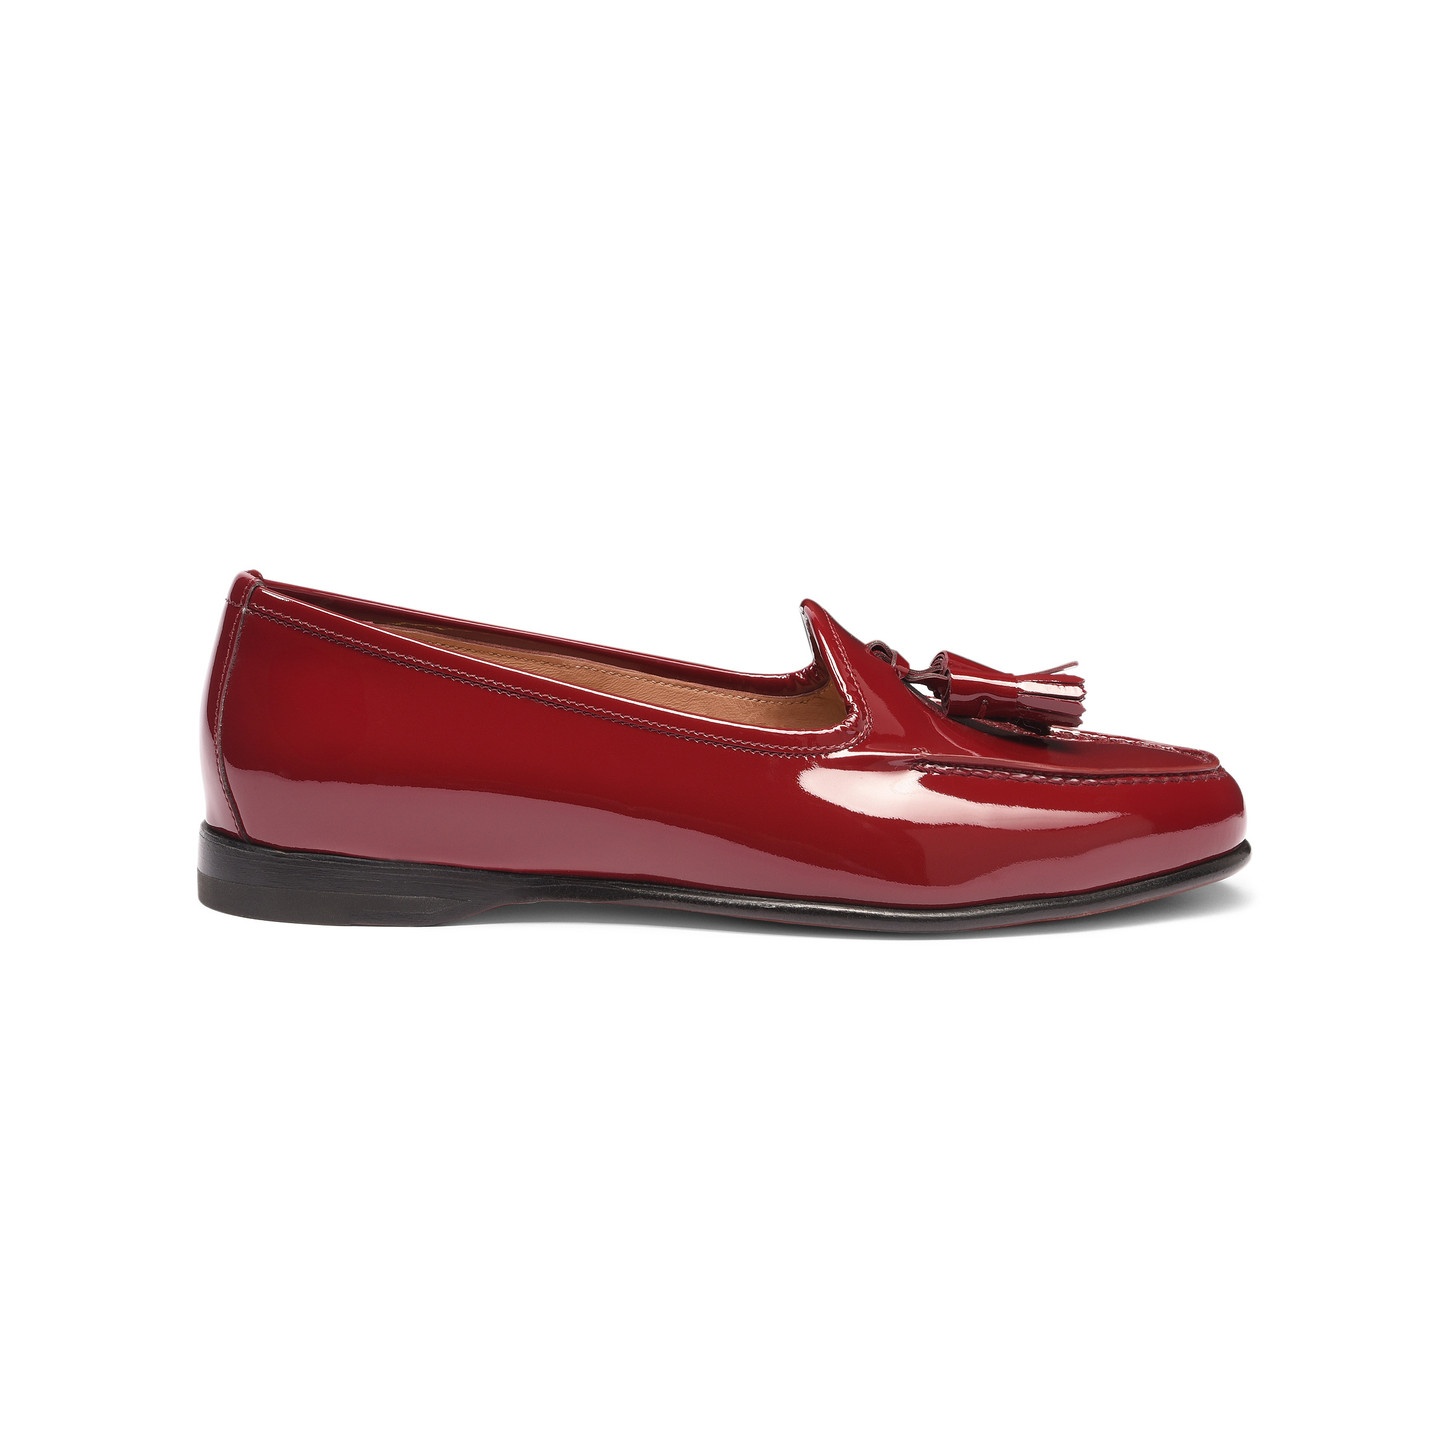 Women's red patent leather Andrea tassel loafer - 1